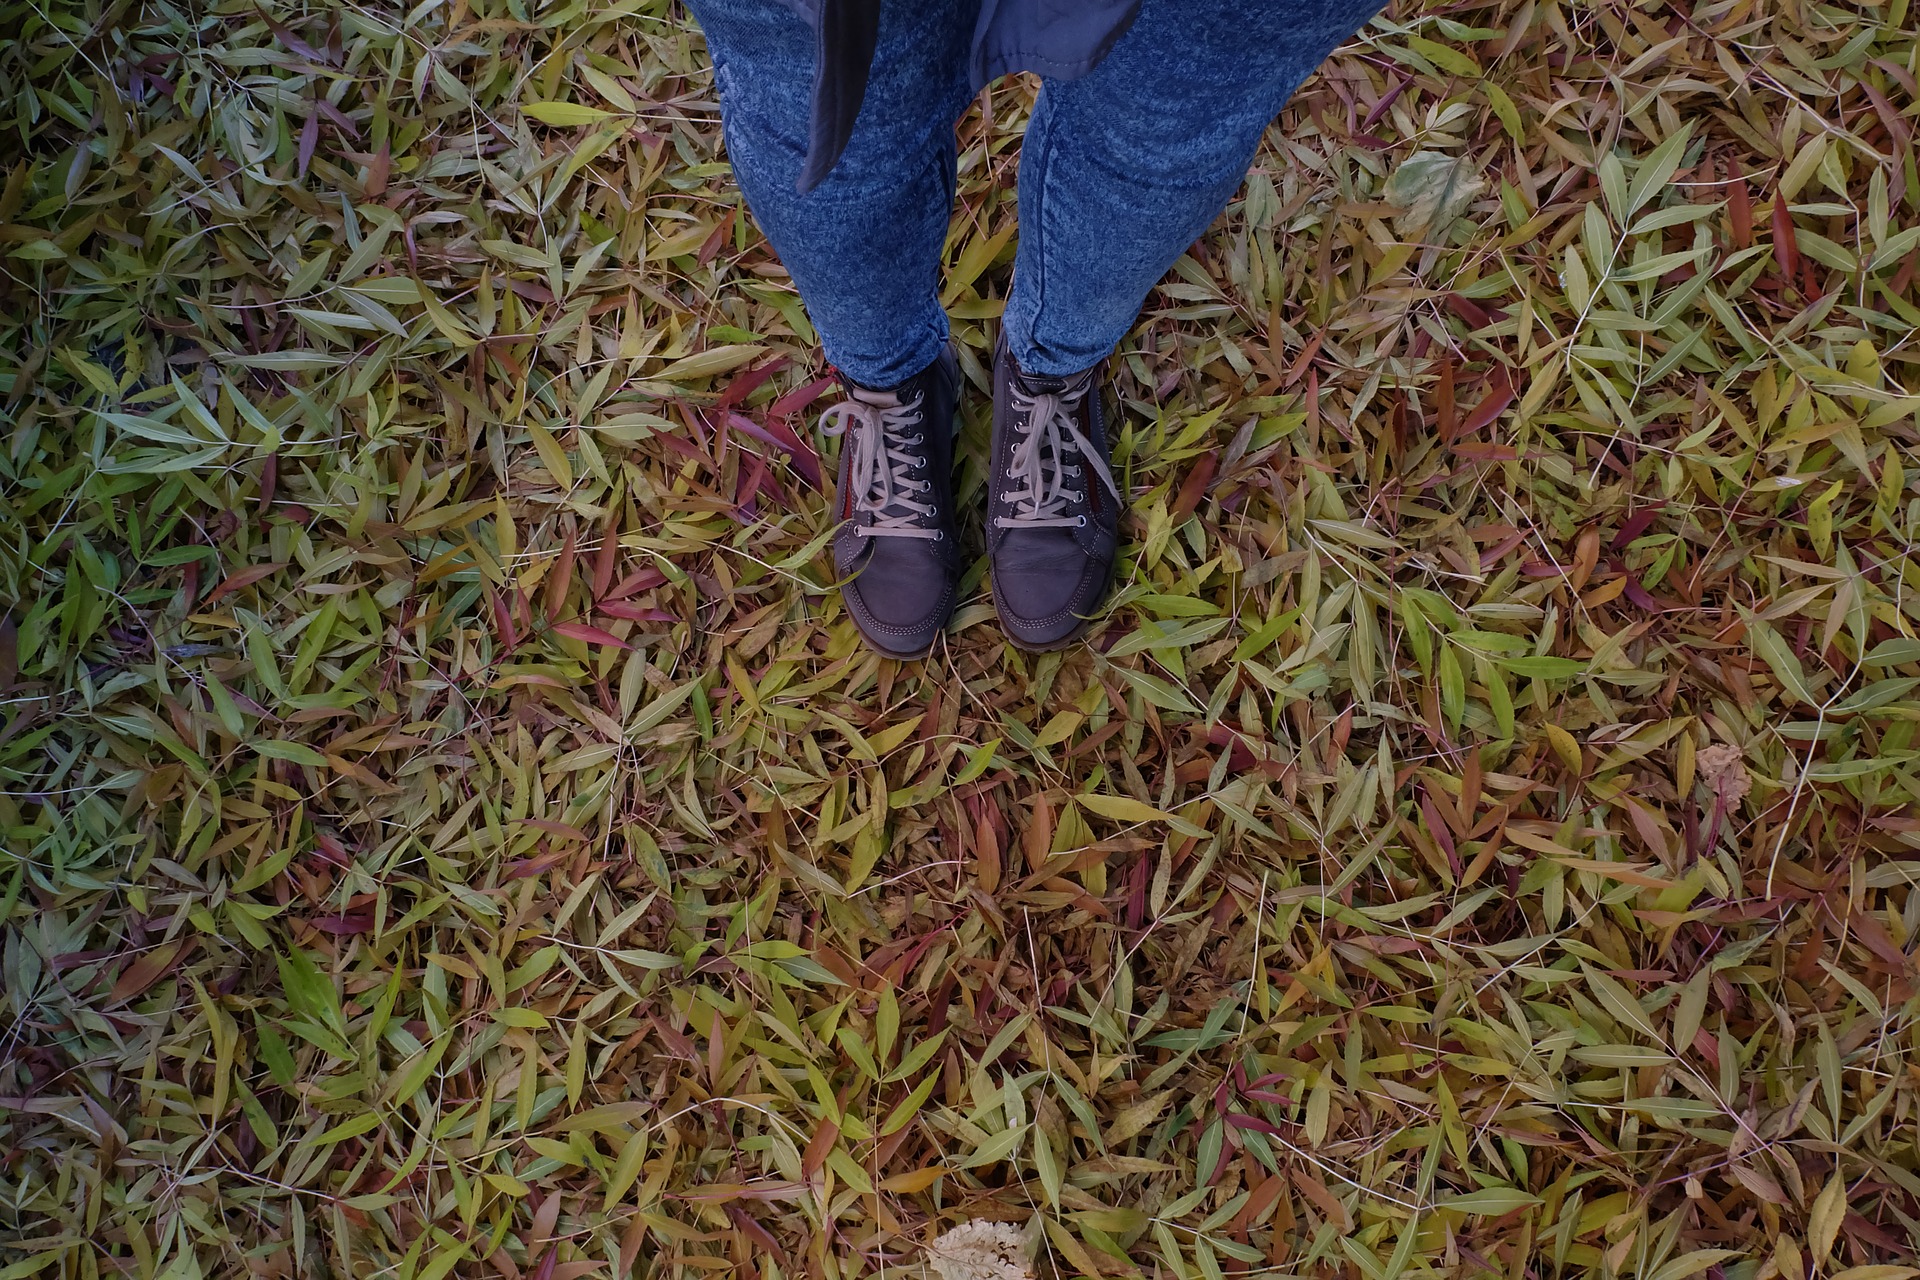 feet in the leaves